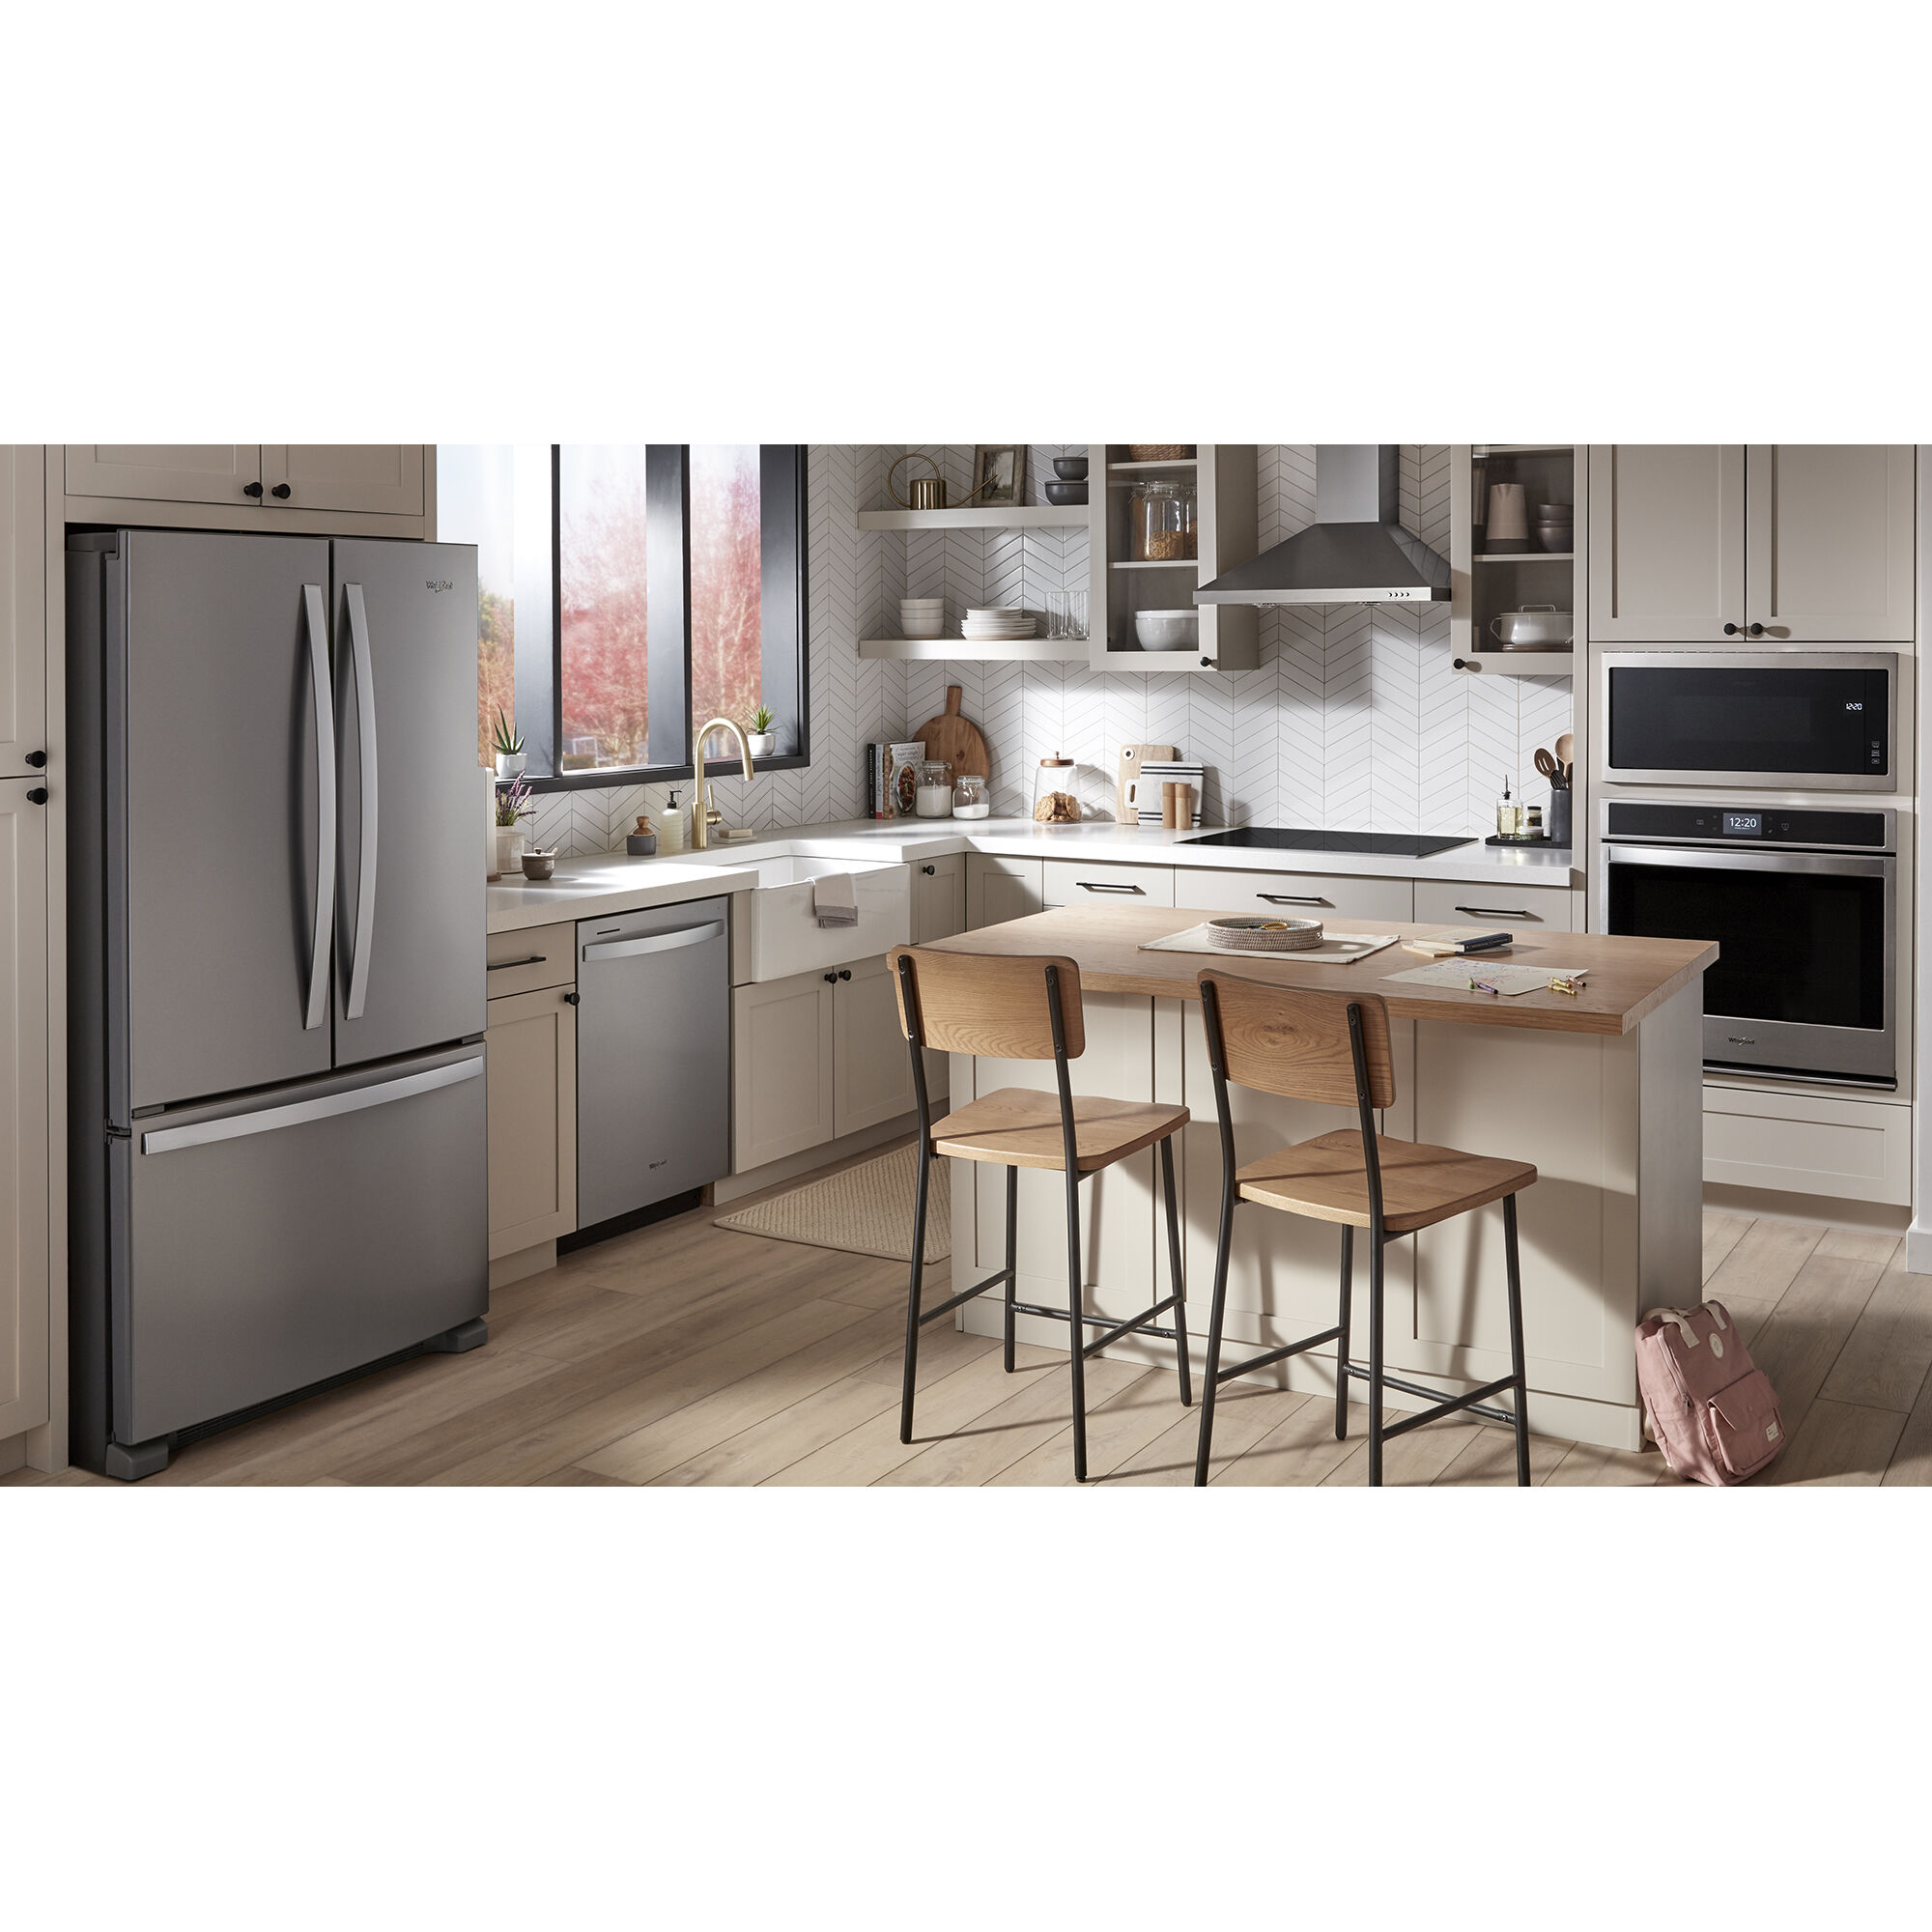 Whirlpool 36 in. 25.2 cu. ft. French Door Refrigerator with Internal Water  Dispenser - Fingerprint Resistant Stainless